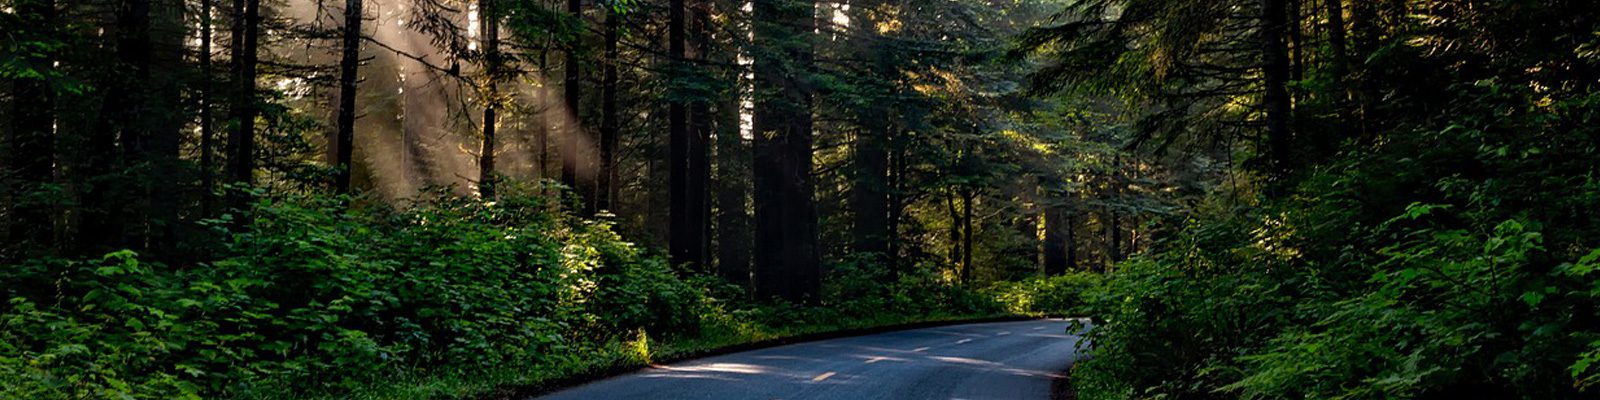 An image of road going through forest